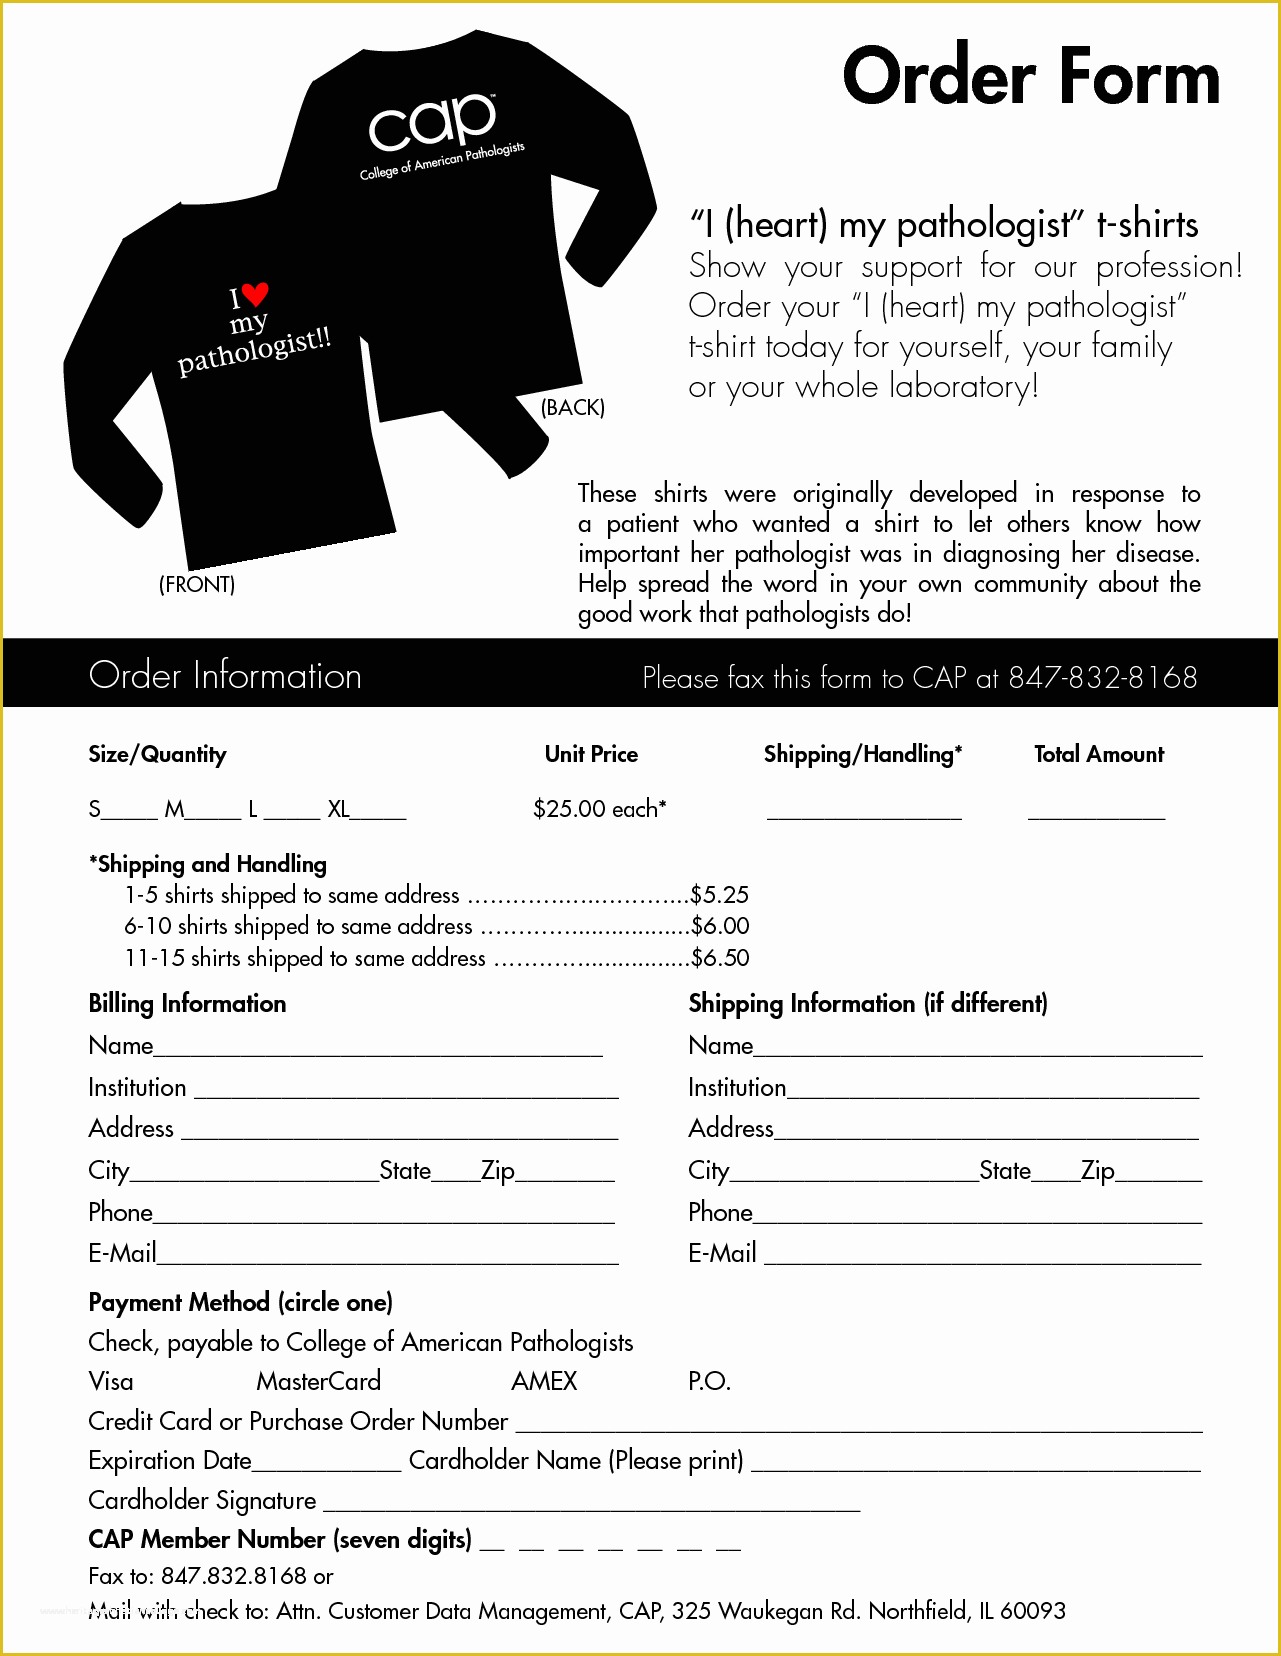 Merchandise order form Template Free Of 7 order form Template Word